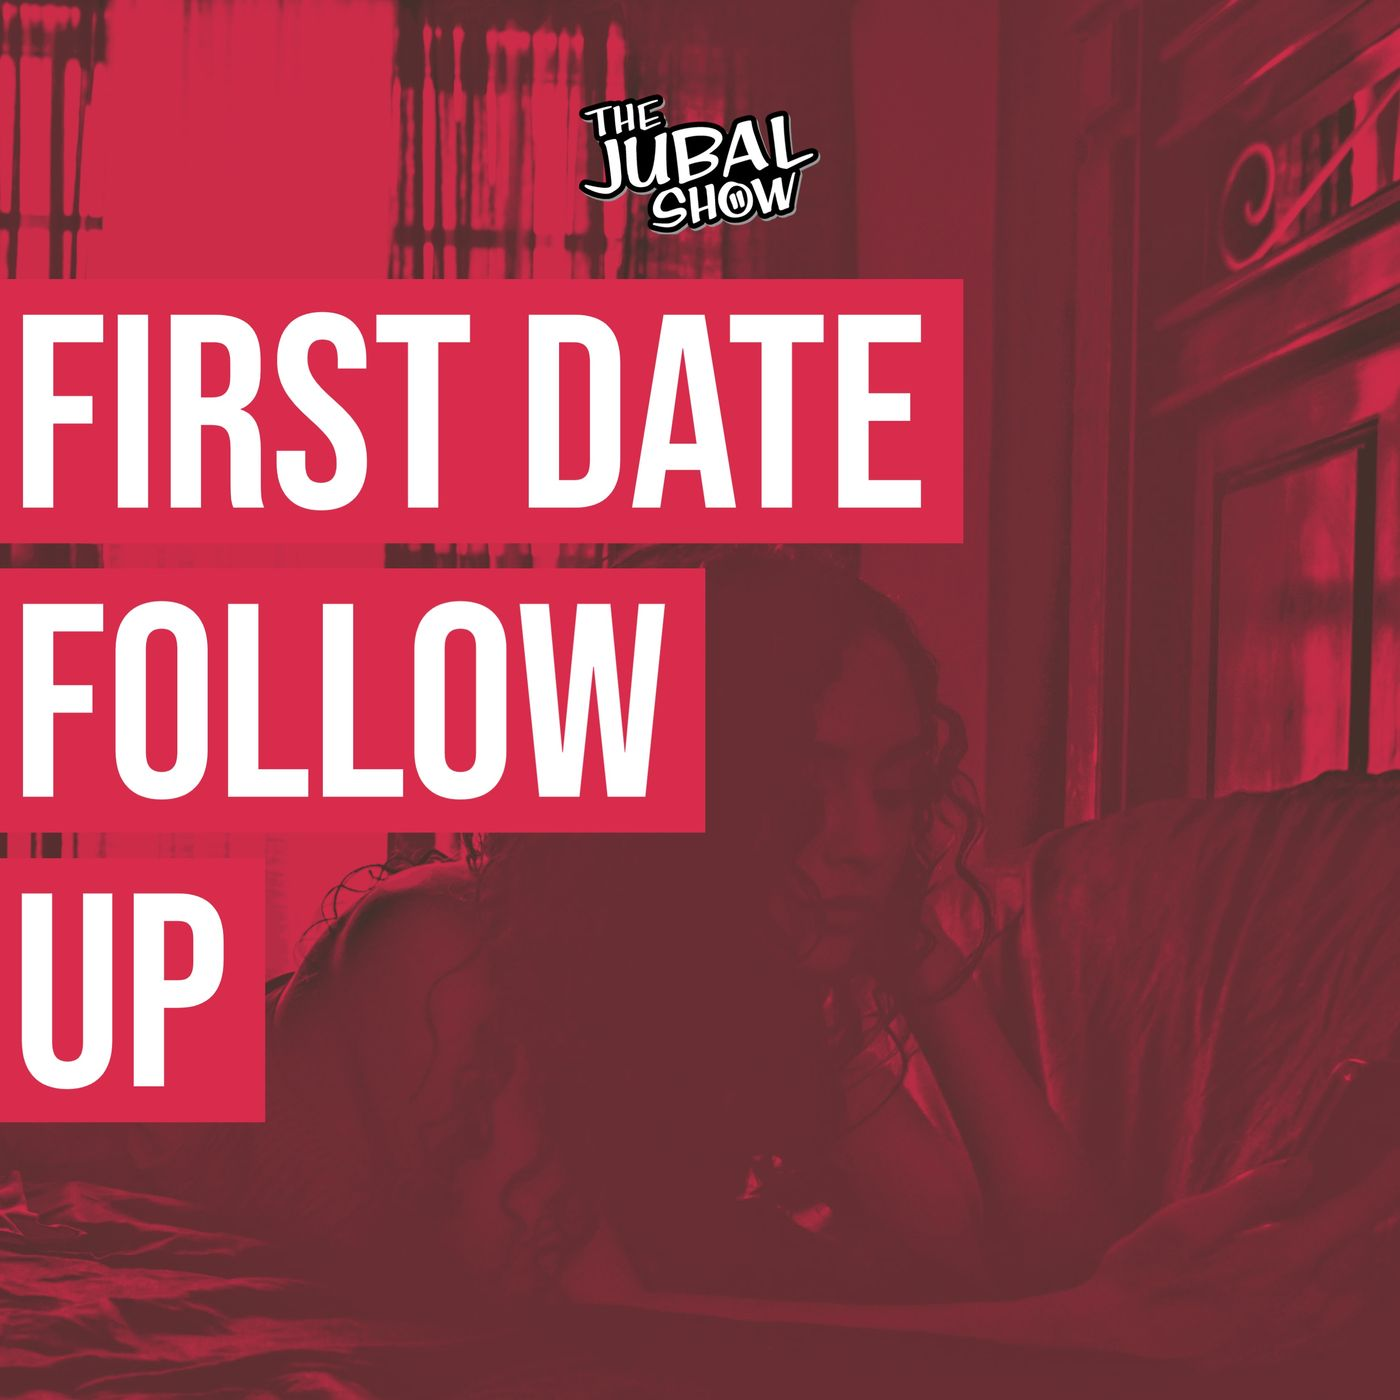 This First Date Follow Up has the biggest plot-twist EVER!